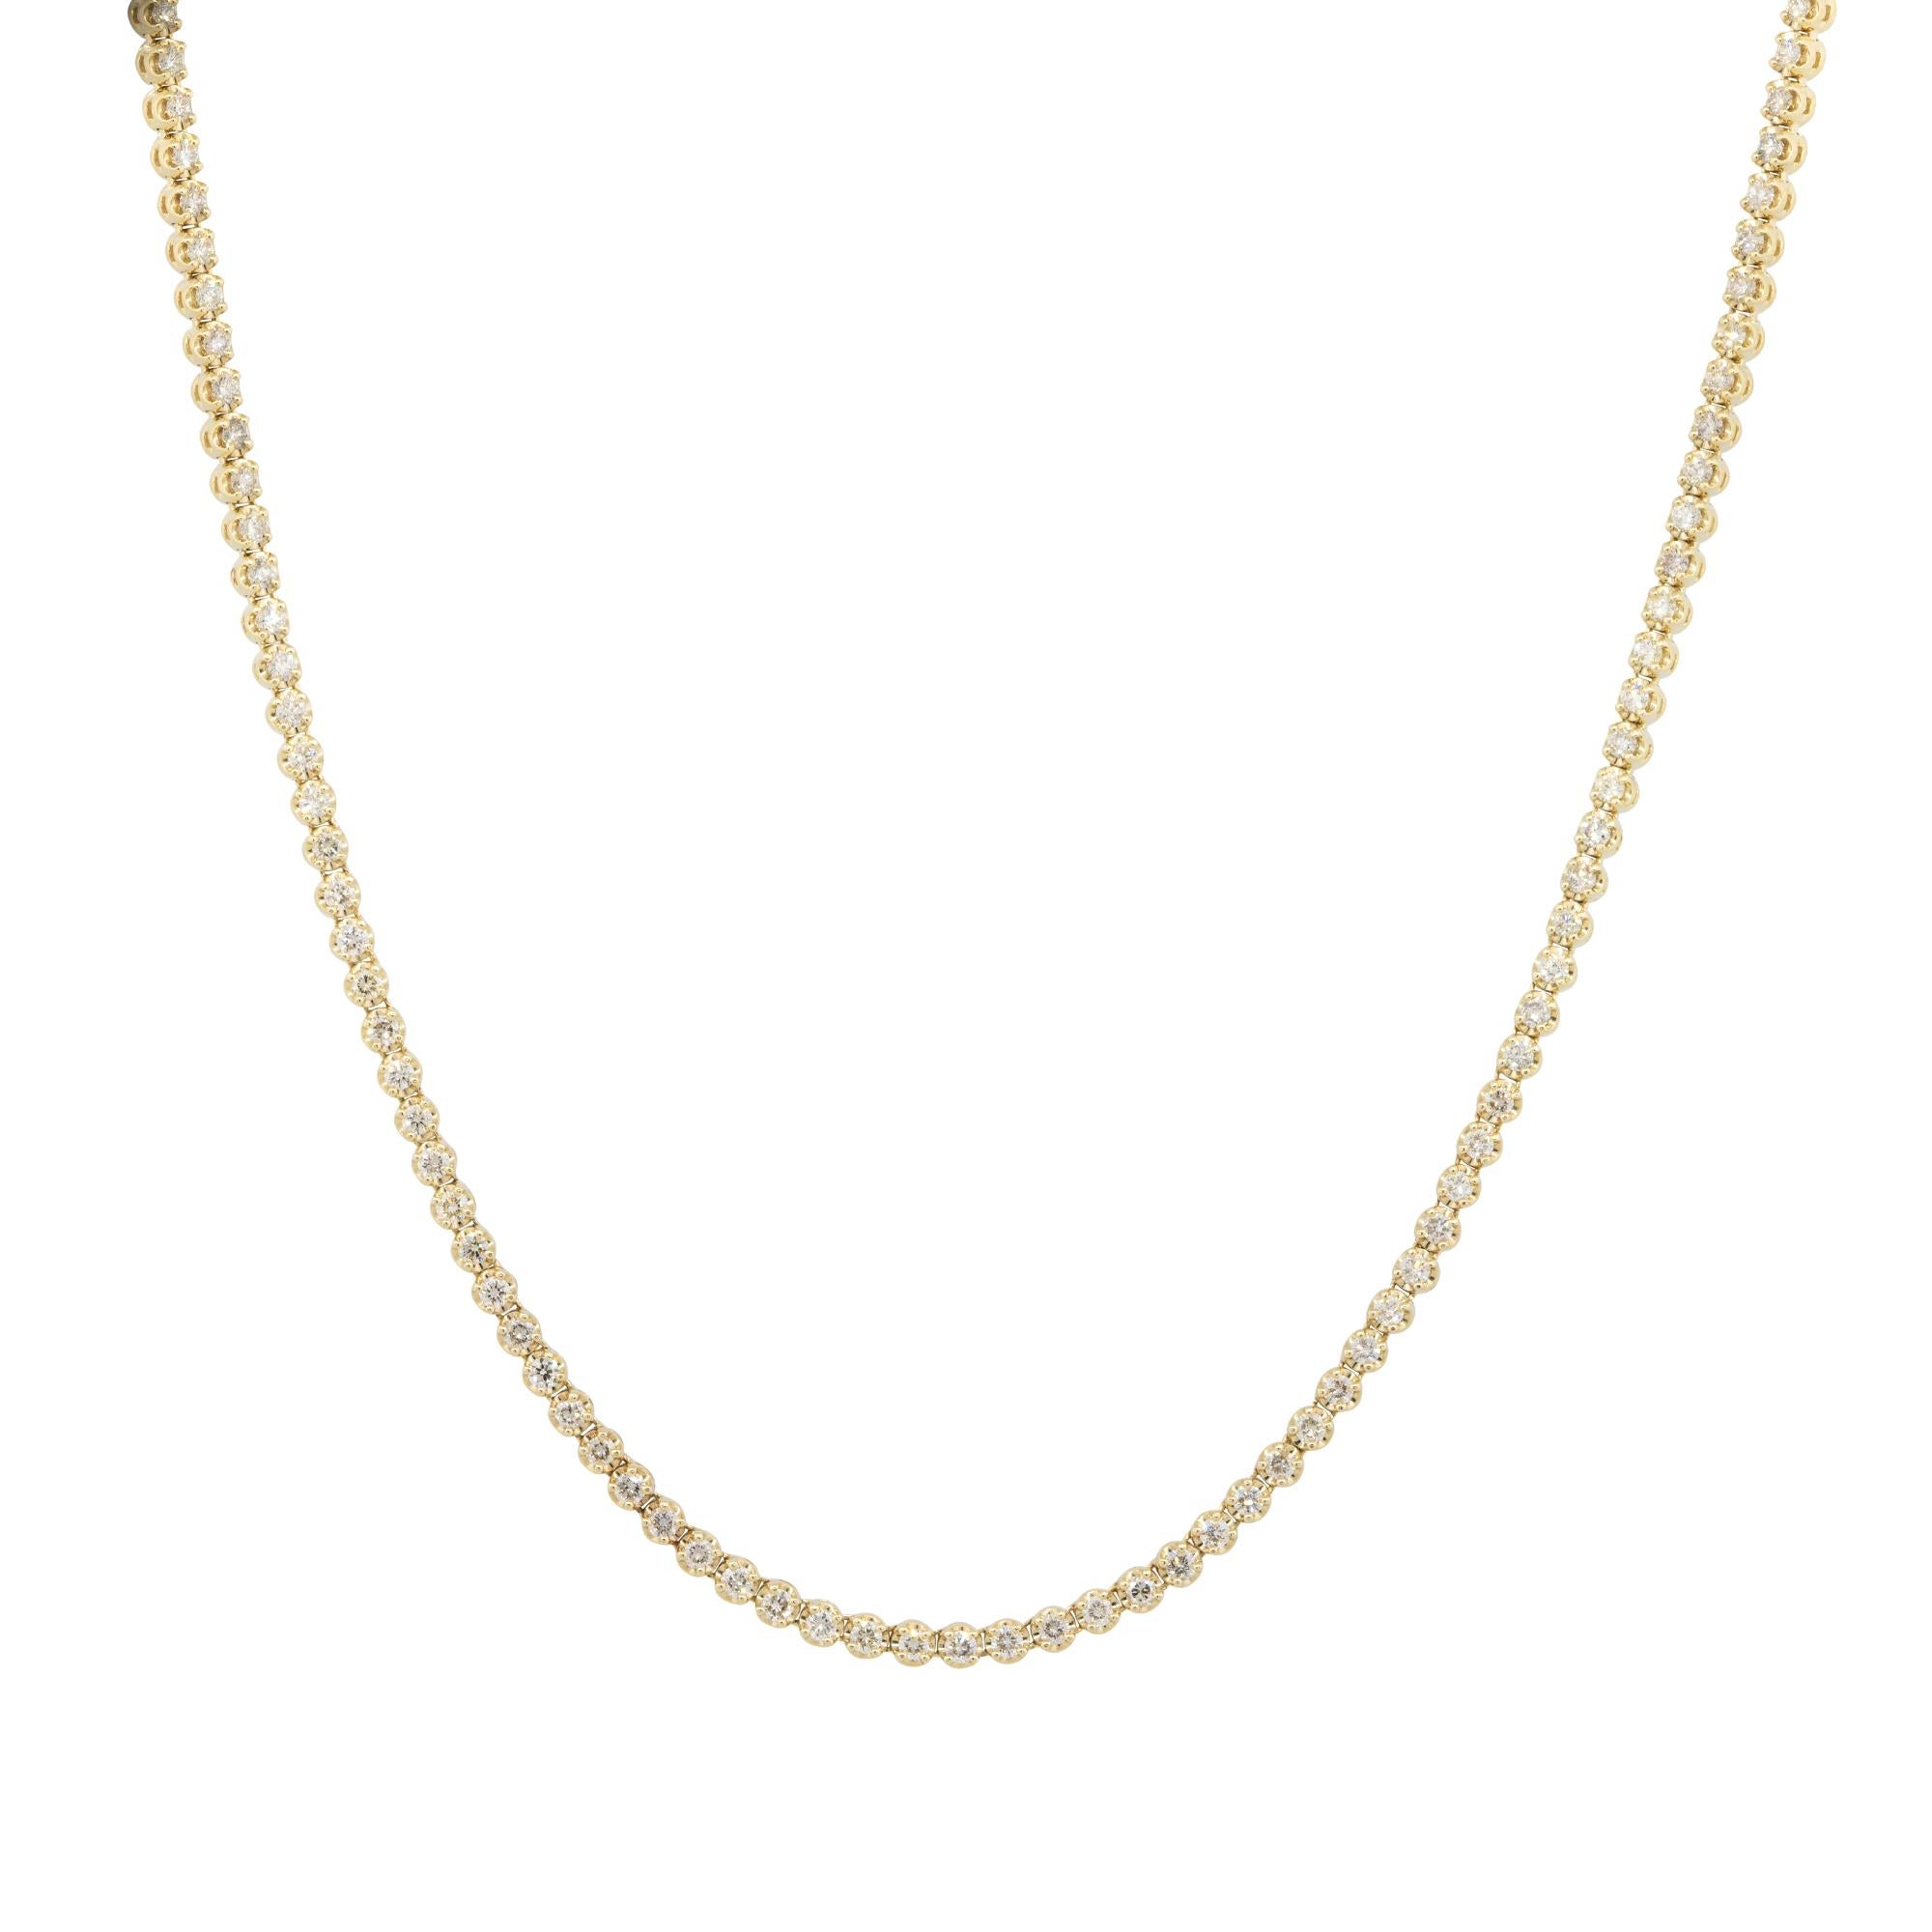 This tennis necklace showcases 3.98 carats of round brilliant diamonds all set in 14 karat yellow gold. The diamonds are near colorless, approximately a G/H in color, and are approximately VS/SI in clarity. This necklace is a staple item for any